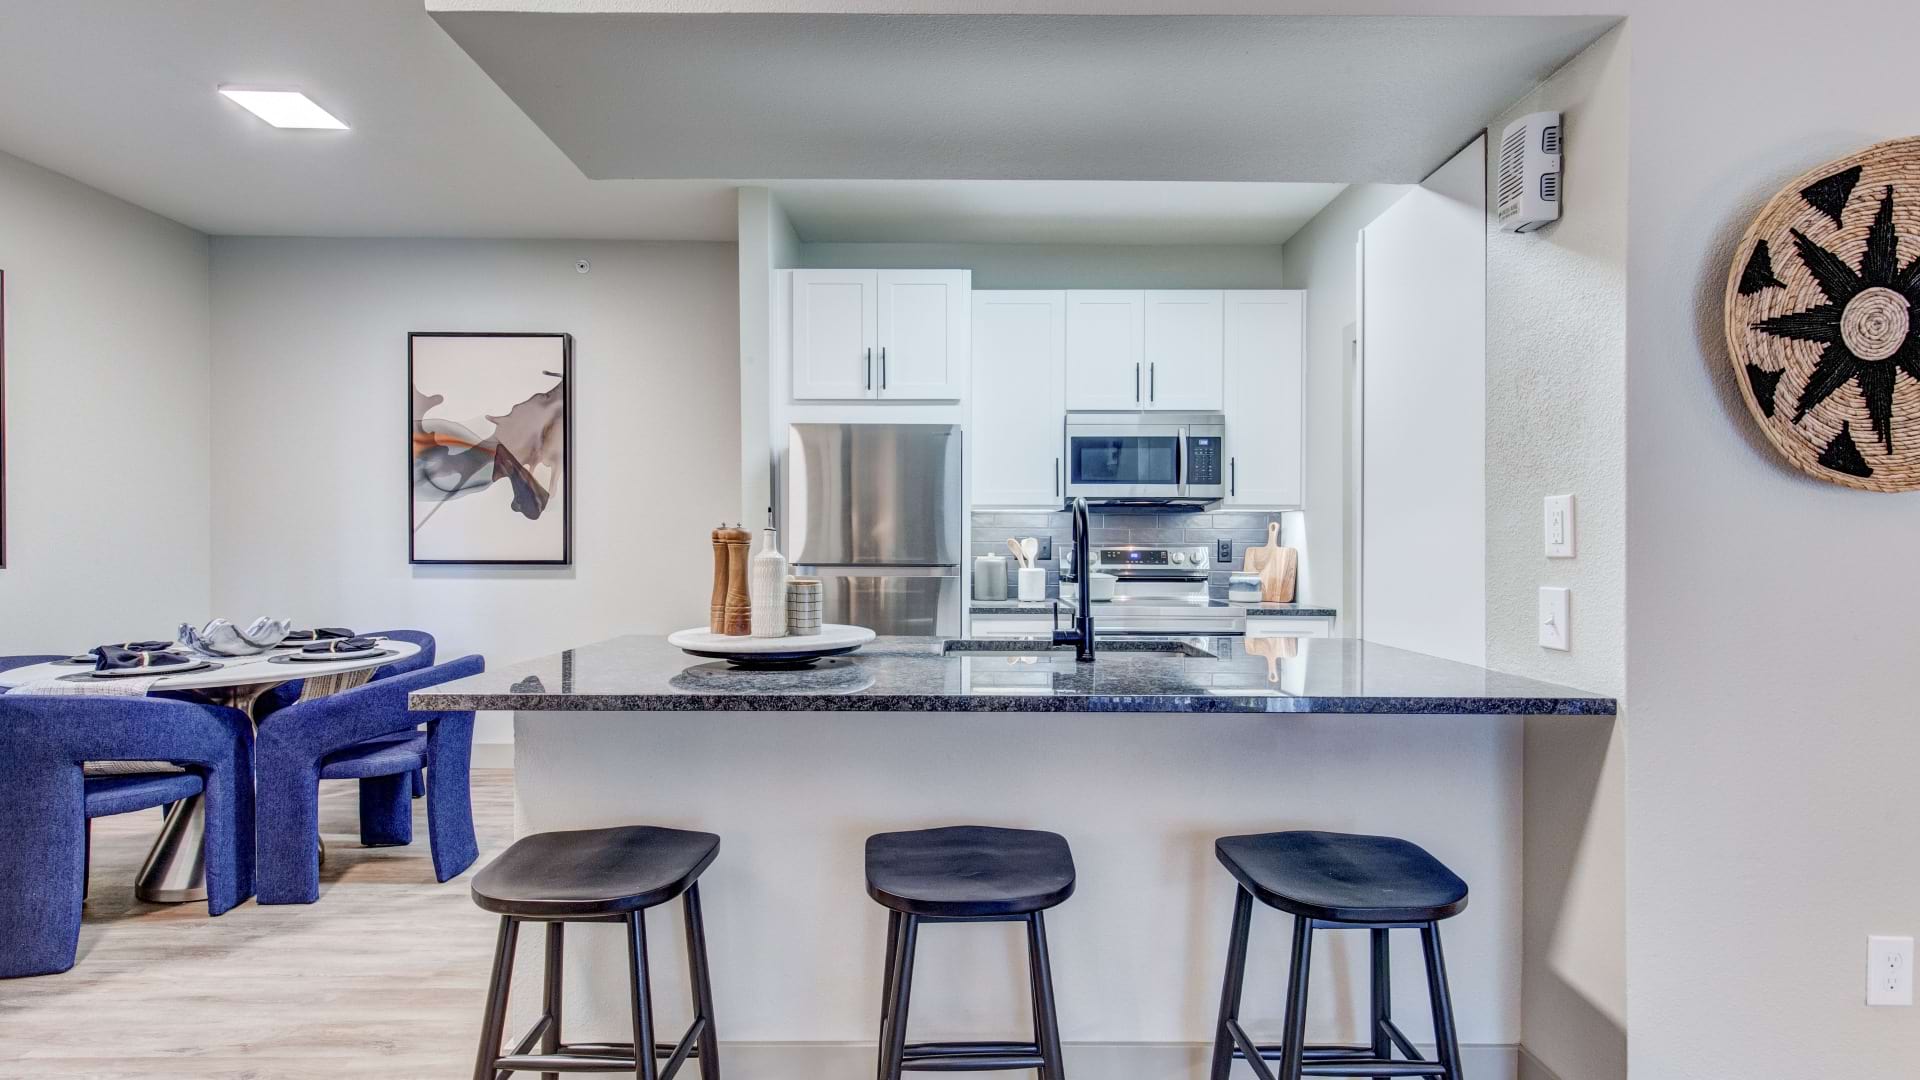 Kitchen Area with Bar at Our Apartments for Rent in Northglenn, CO